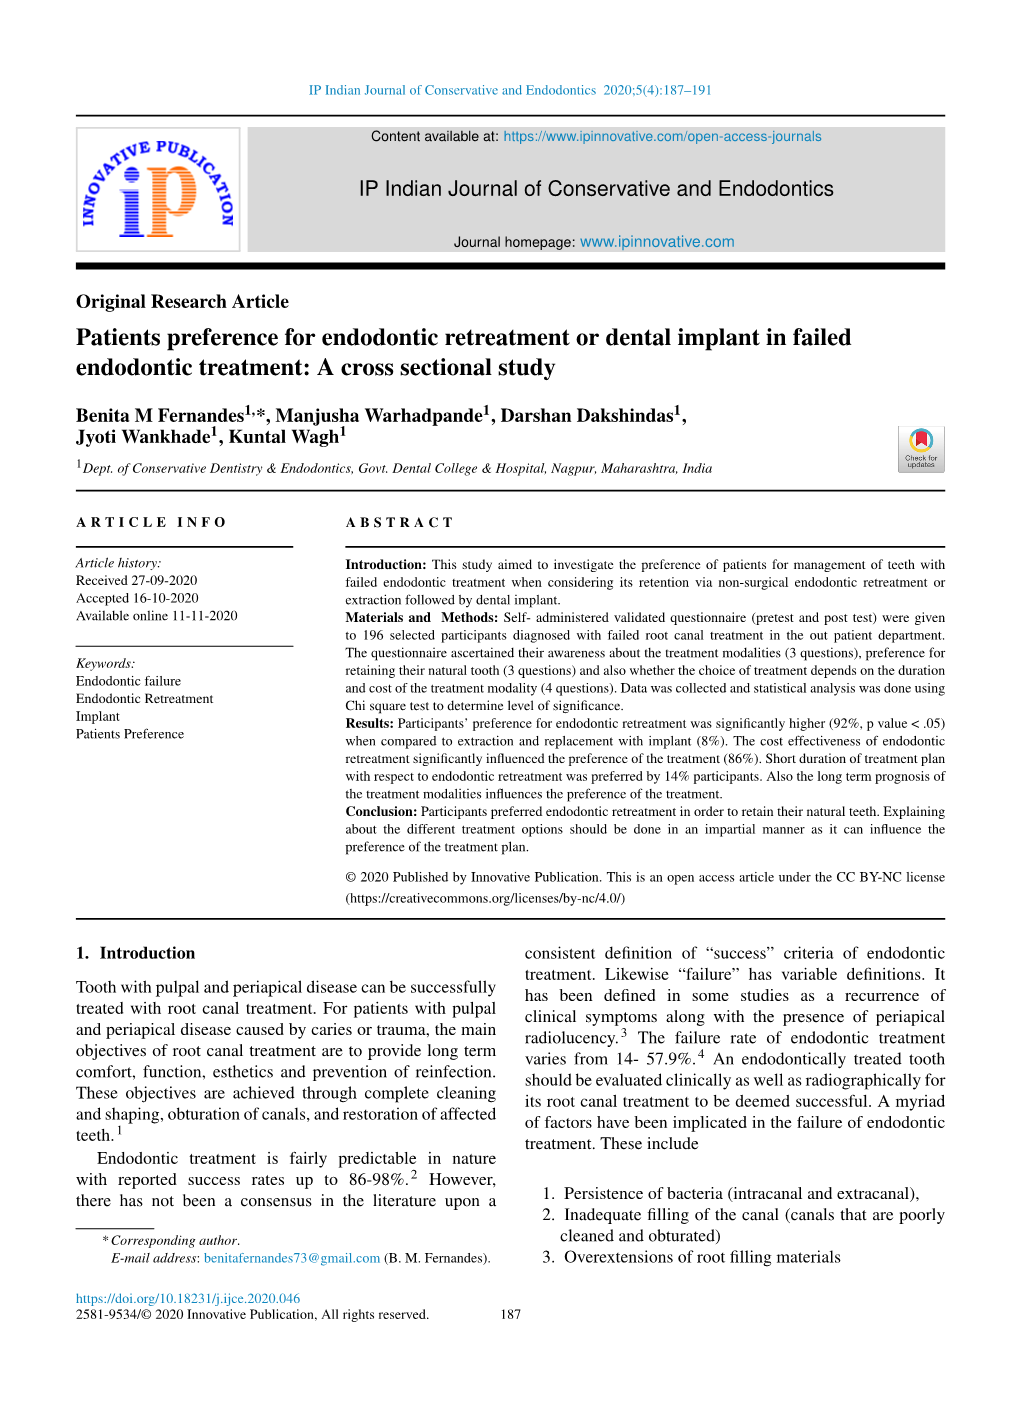 Patients Preference for Endodontic Retreatment Or Dental Implant in Failed Endodontic Treatment: a Cross Sectional Study